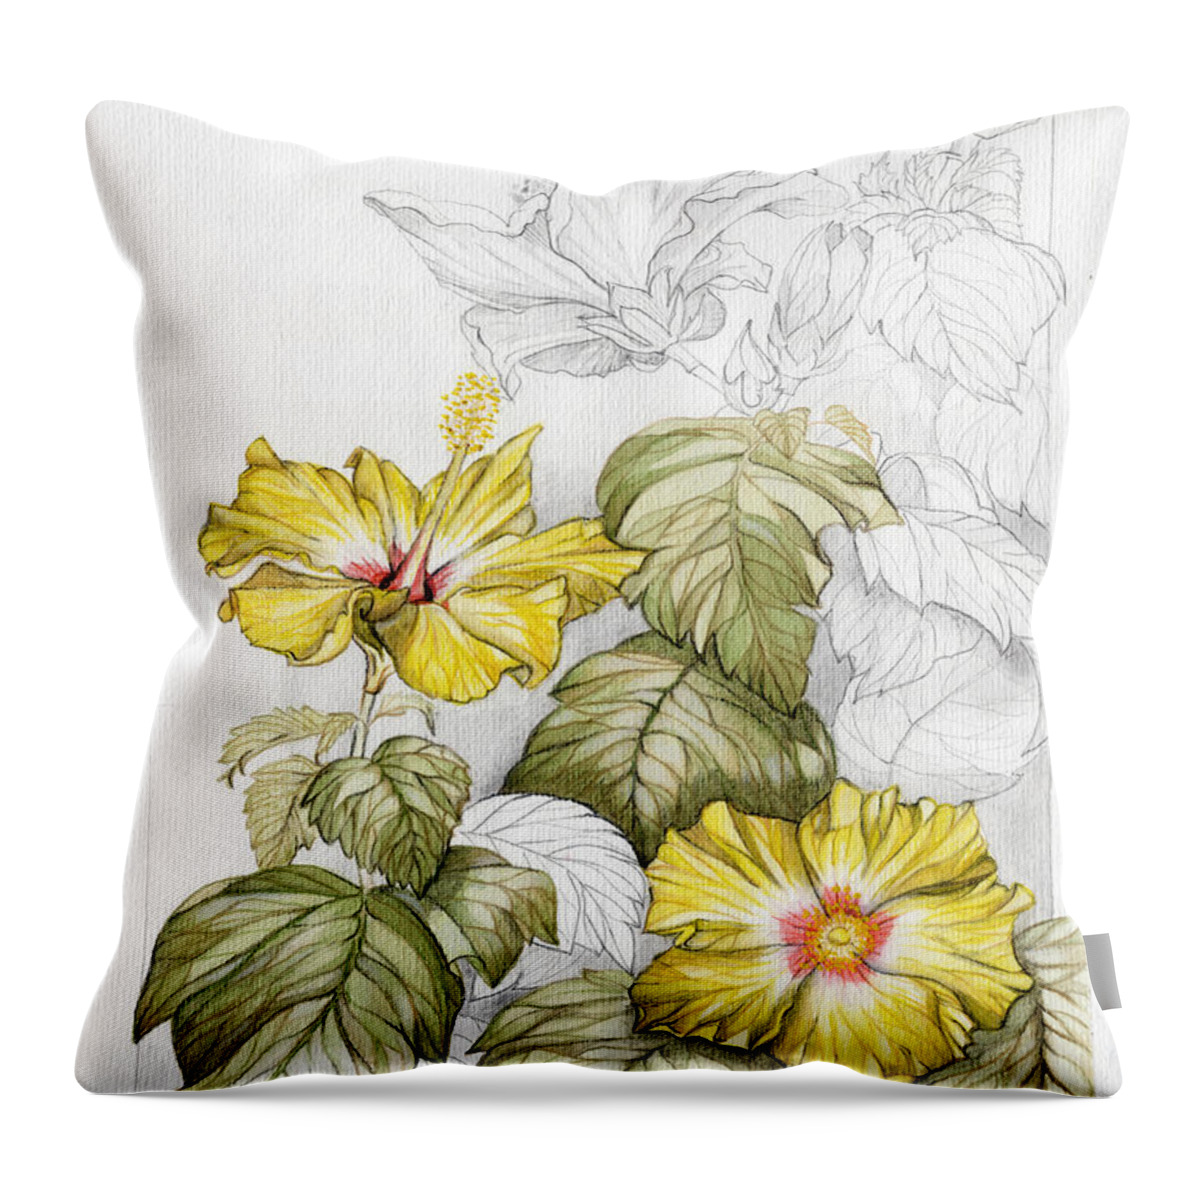 Drawing Throw Pillow featuring the painting Hibiscus Watercolor Pencil Study by Elena Daniel Yakubovich